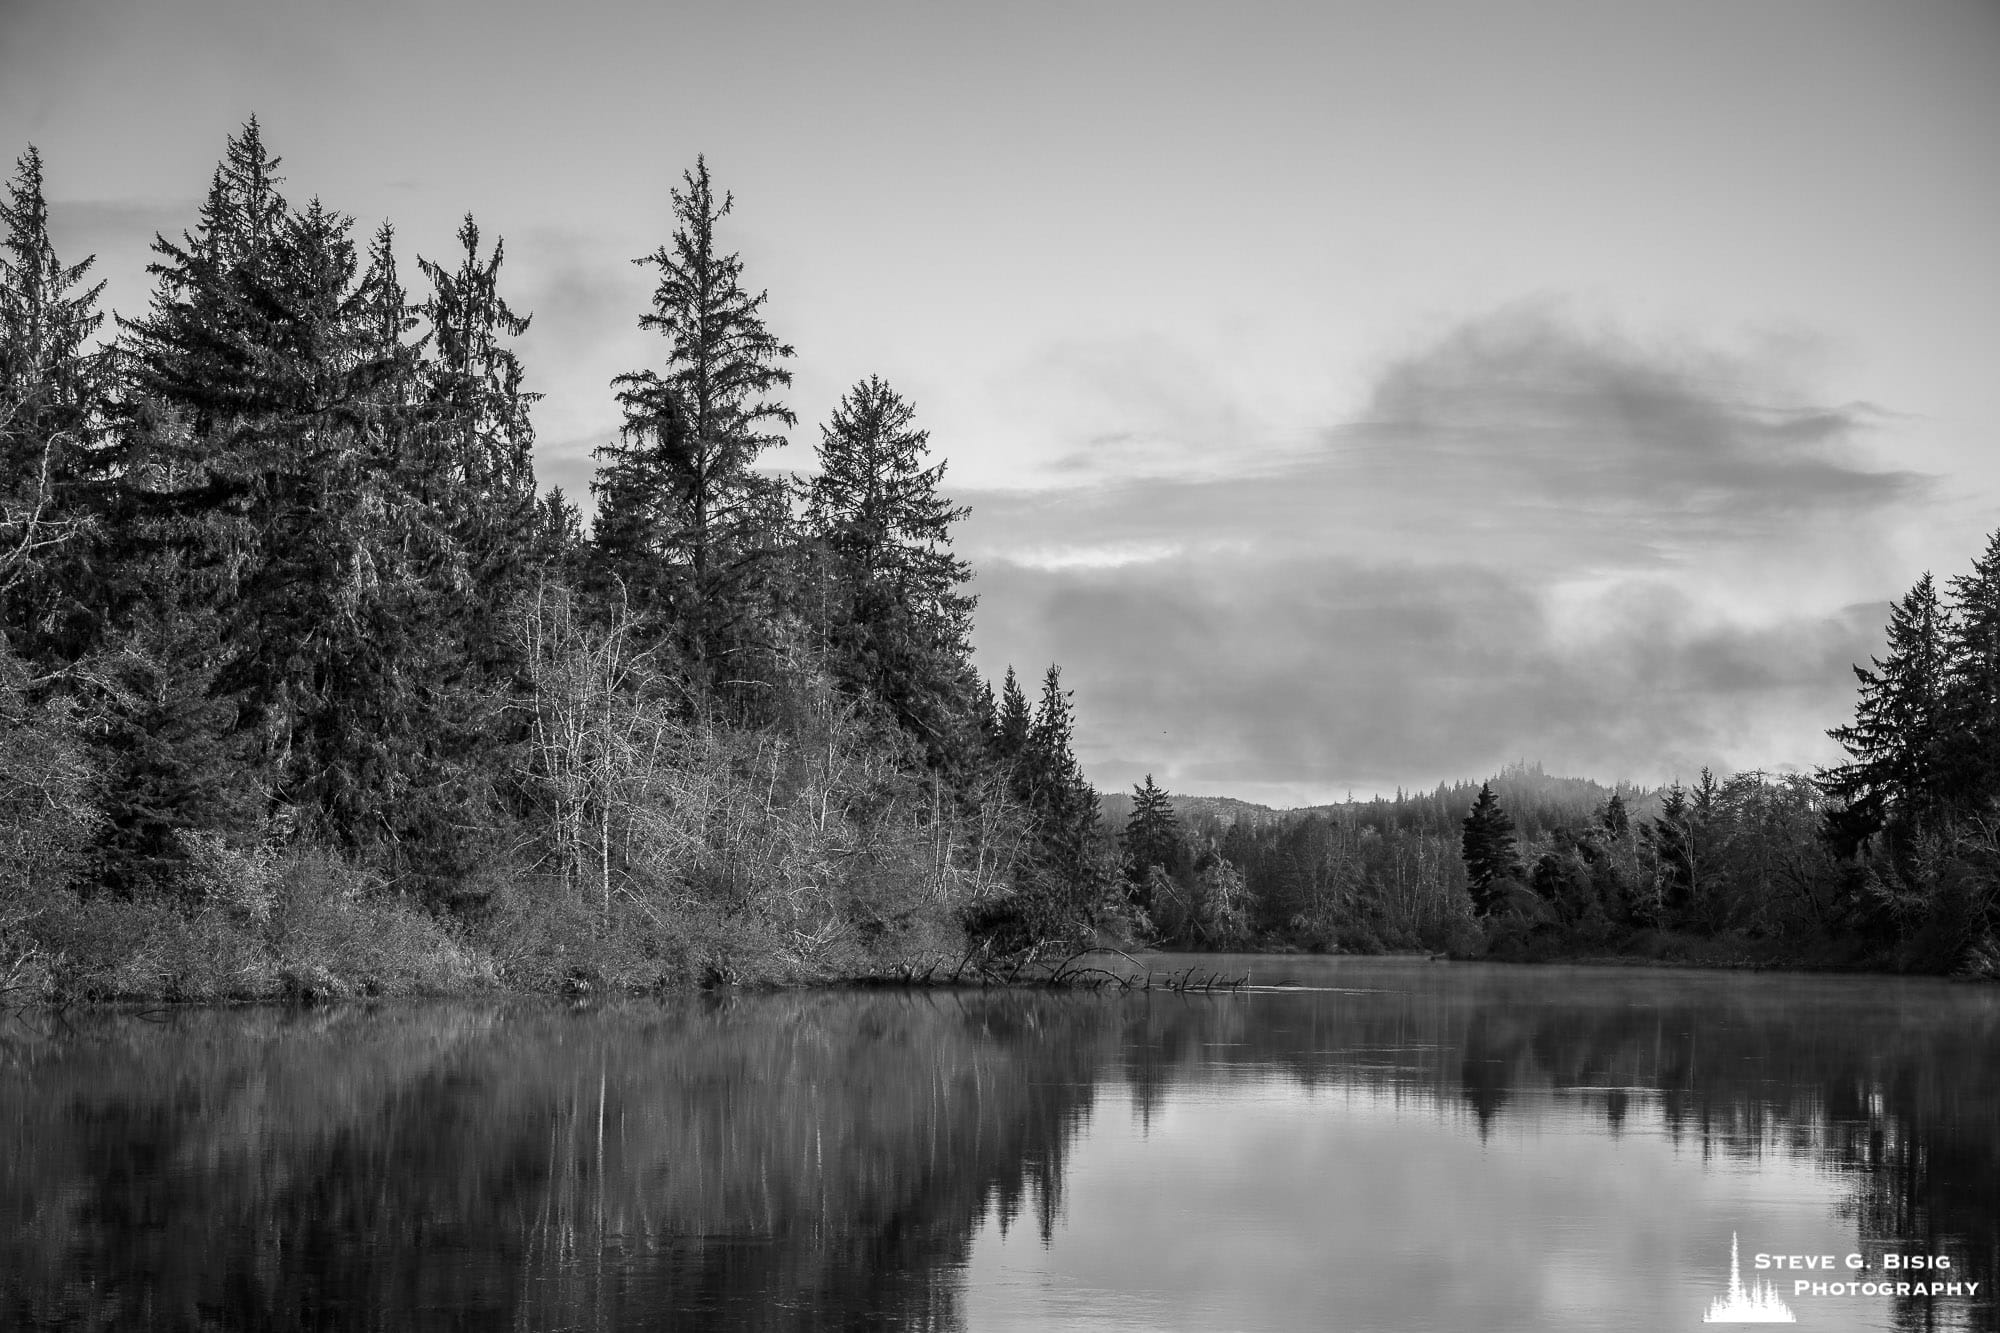 A black and white landscape photograph of the Grays River in Southwest Washington.